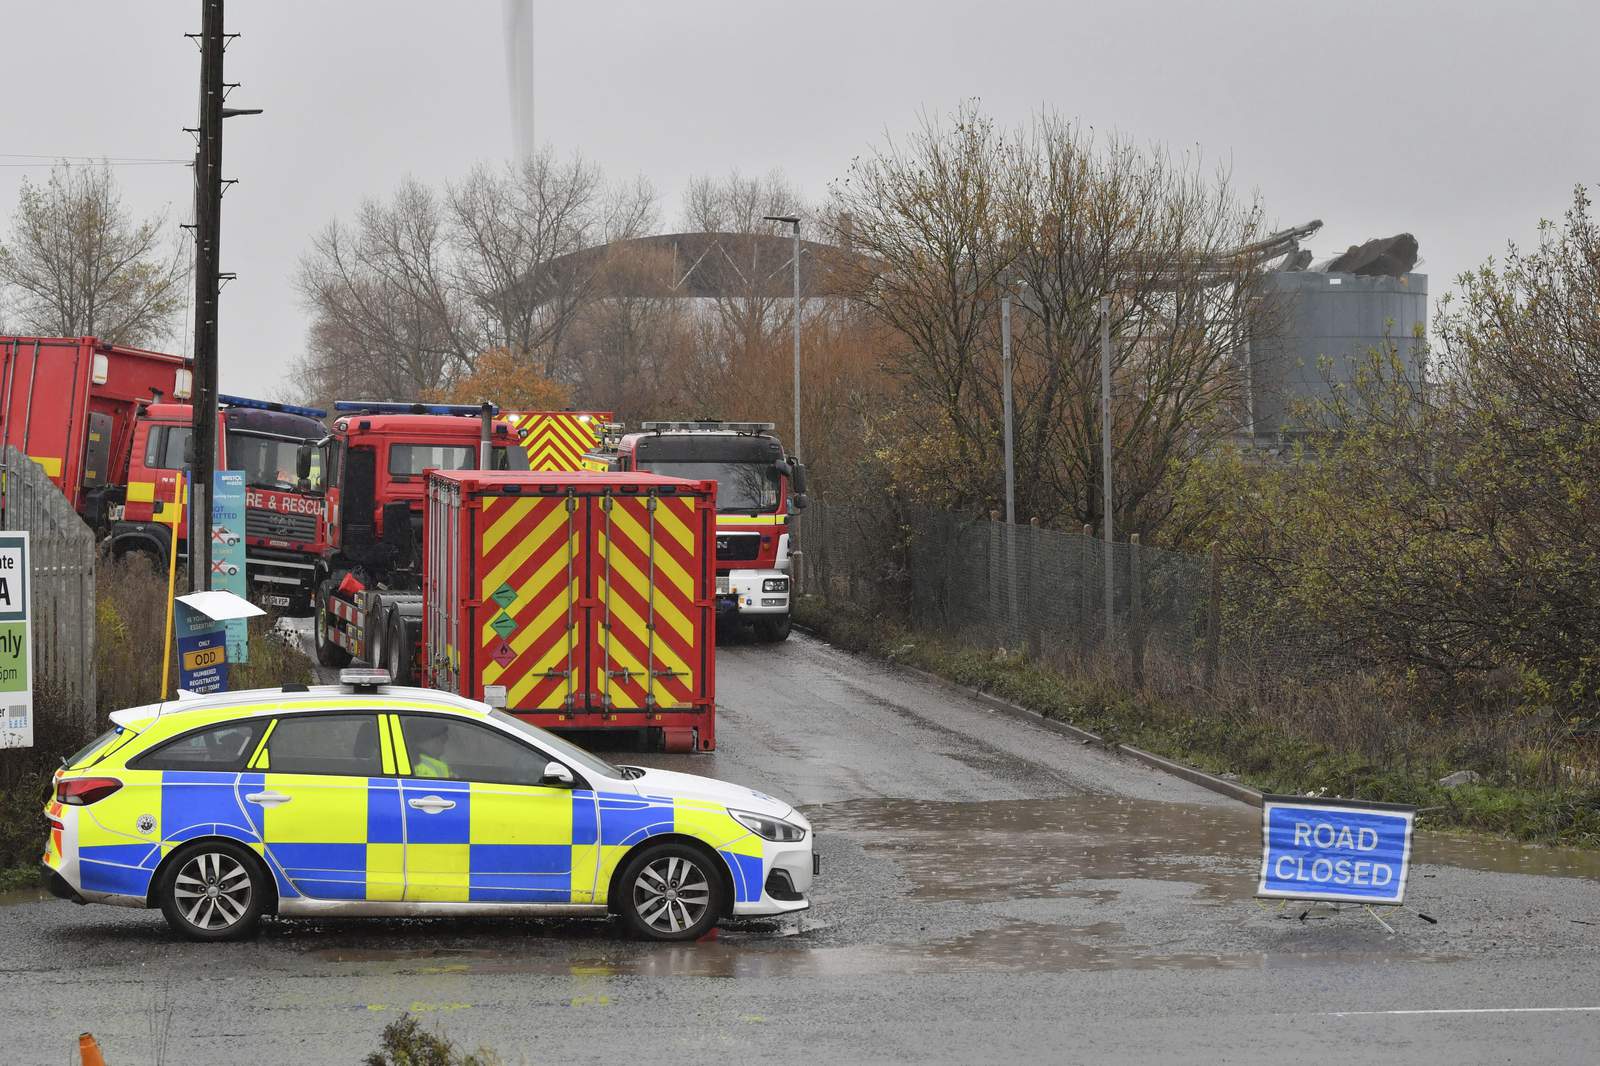 ‘Multiple casualties’ after explosion at UK sewage plant